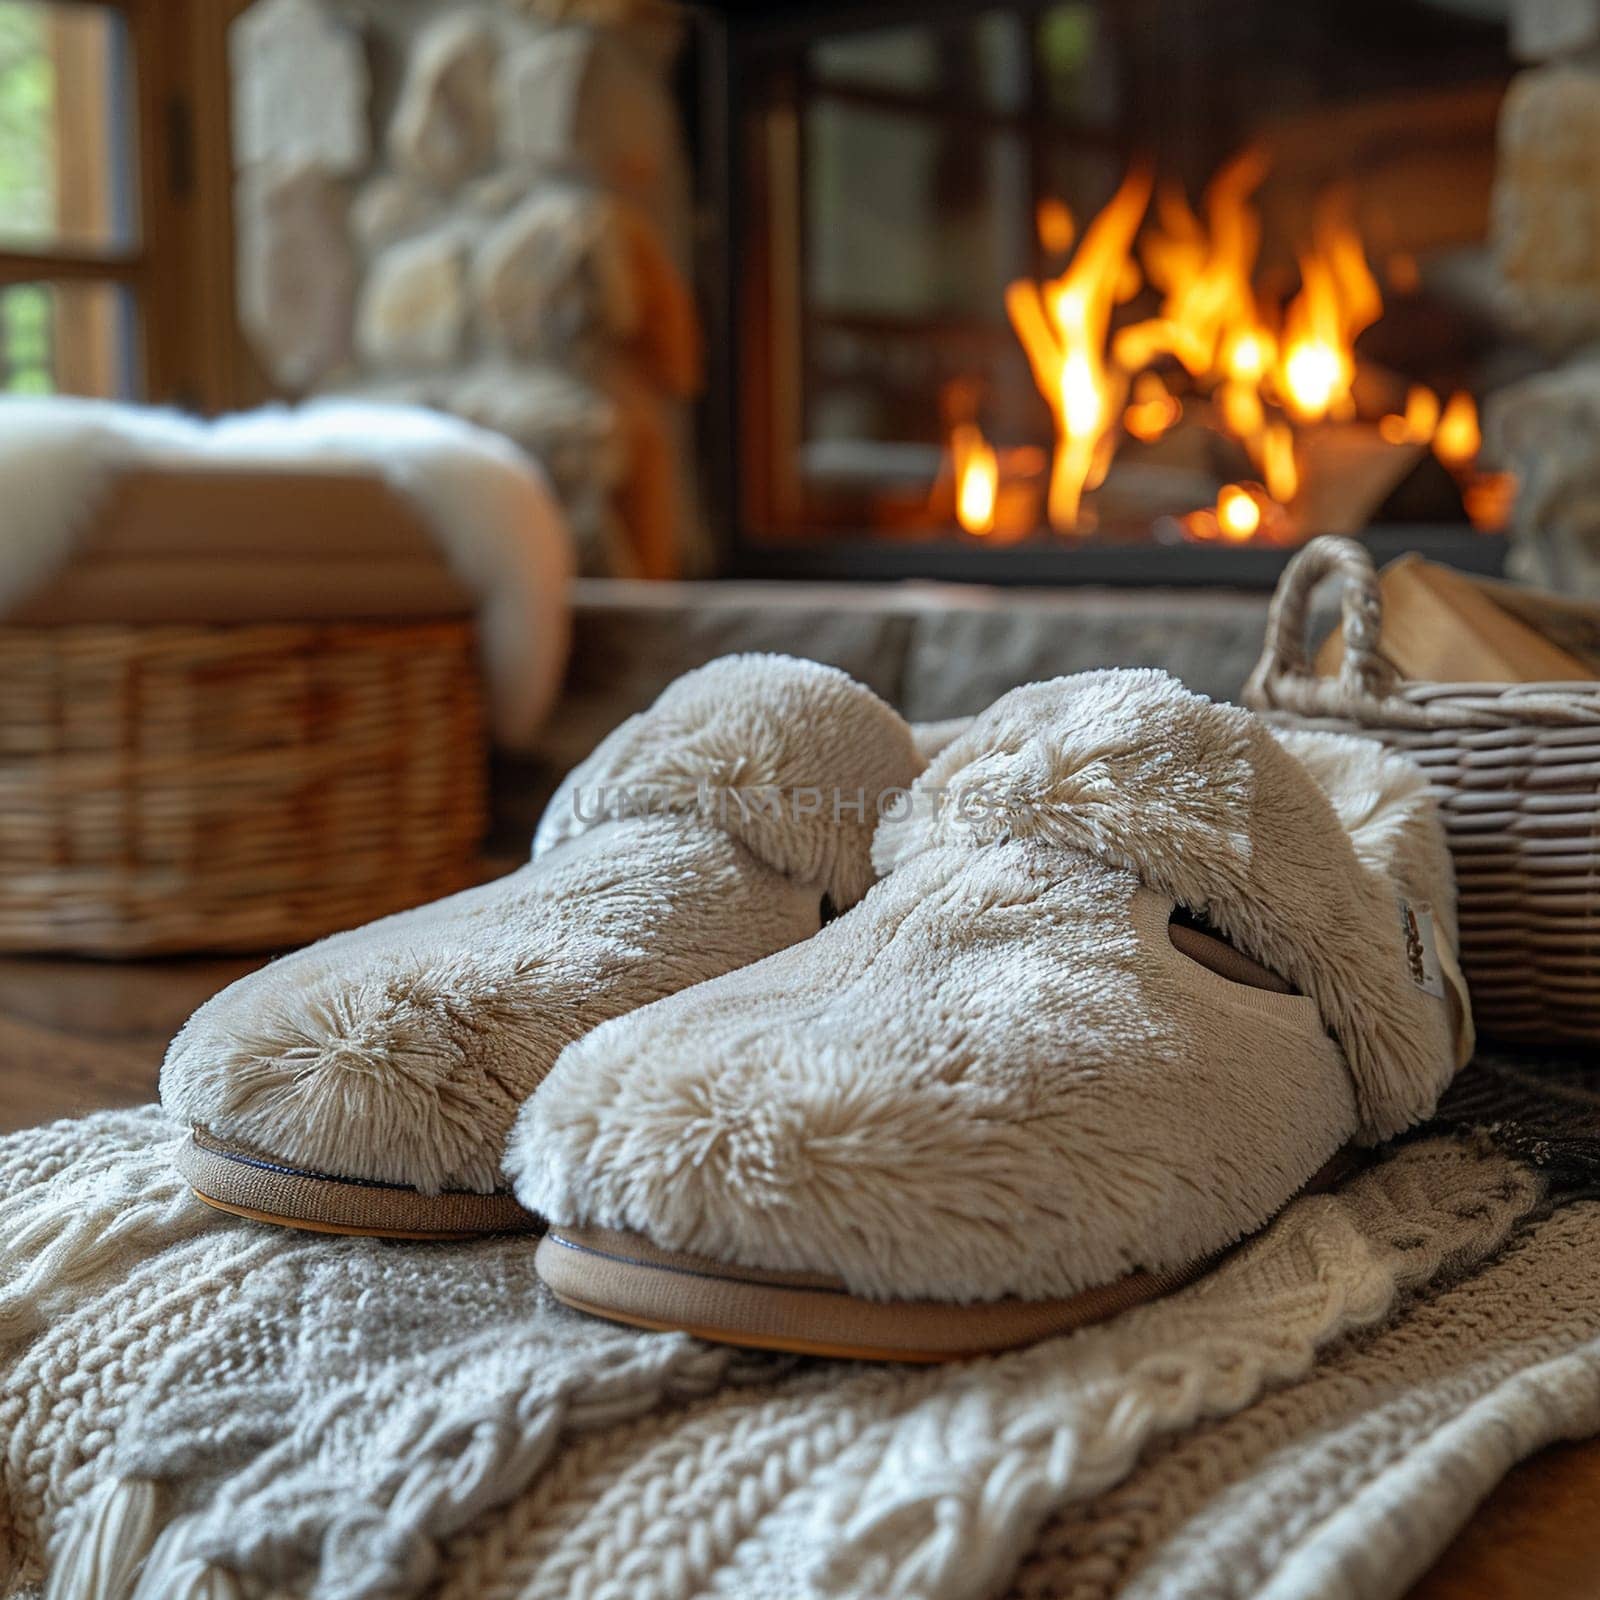 Pair of plush slippers beside cozy fireplace for World Sleep Day.